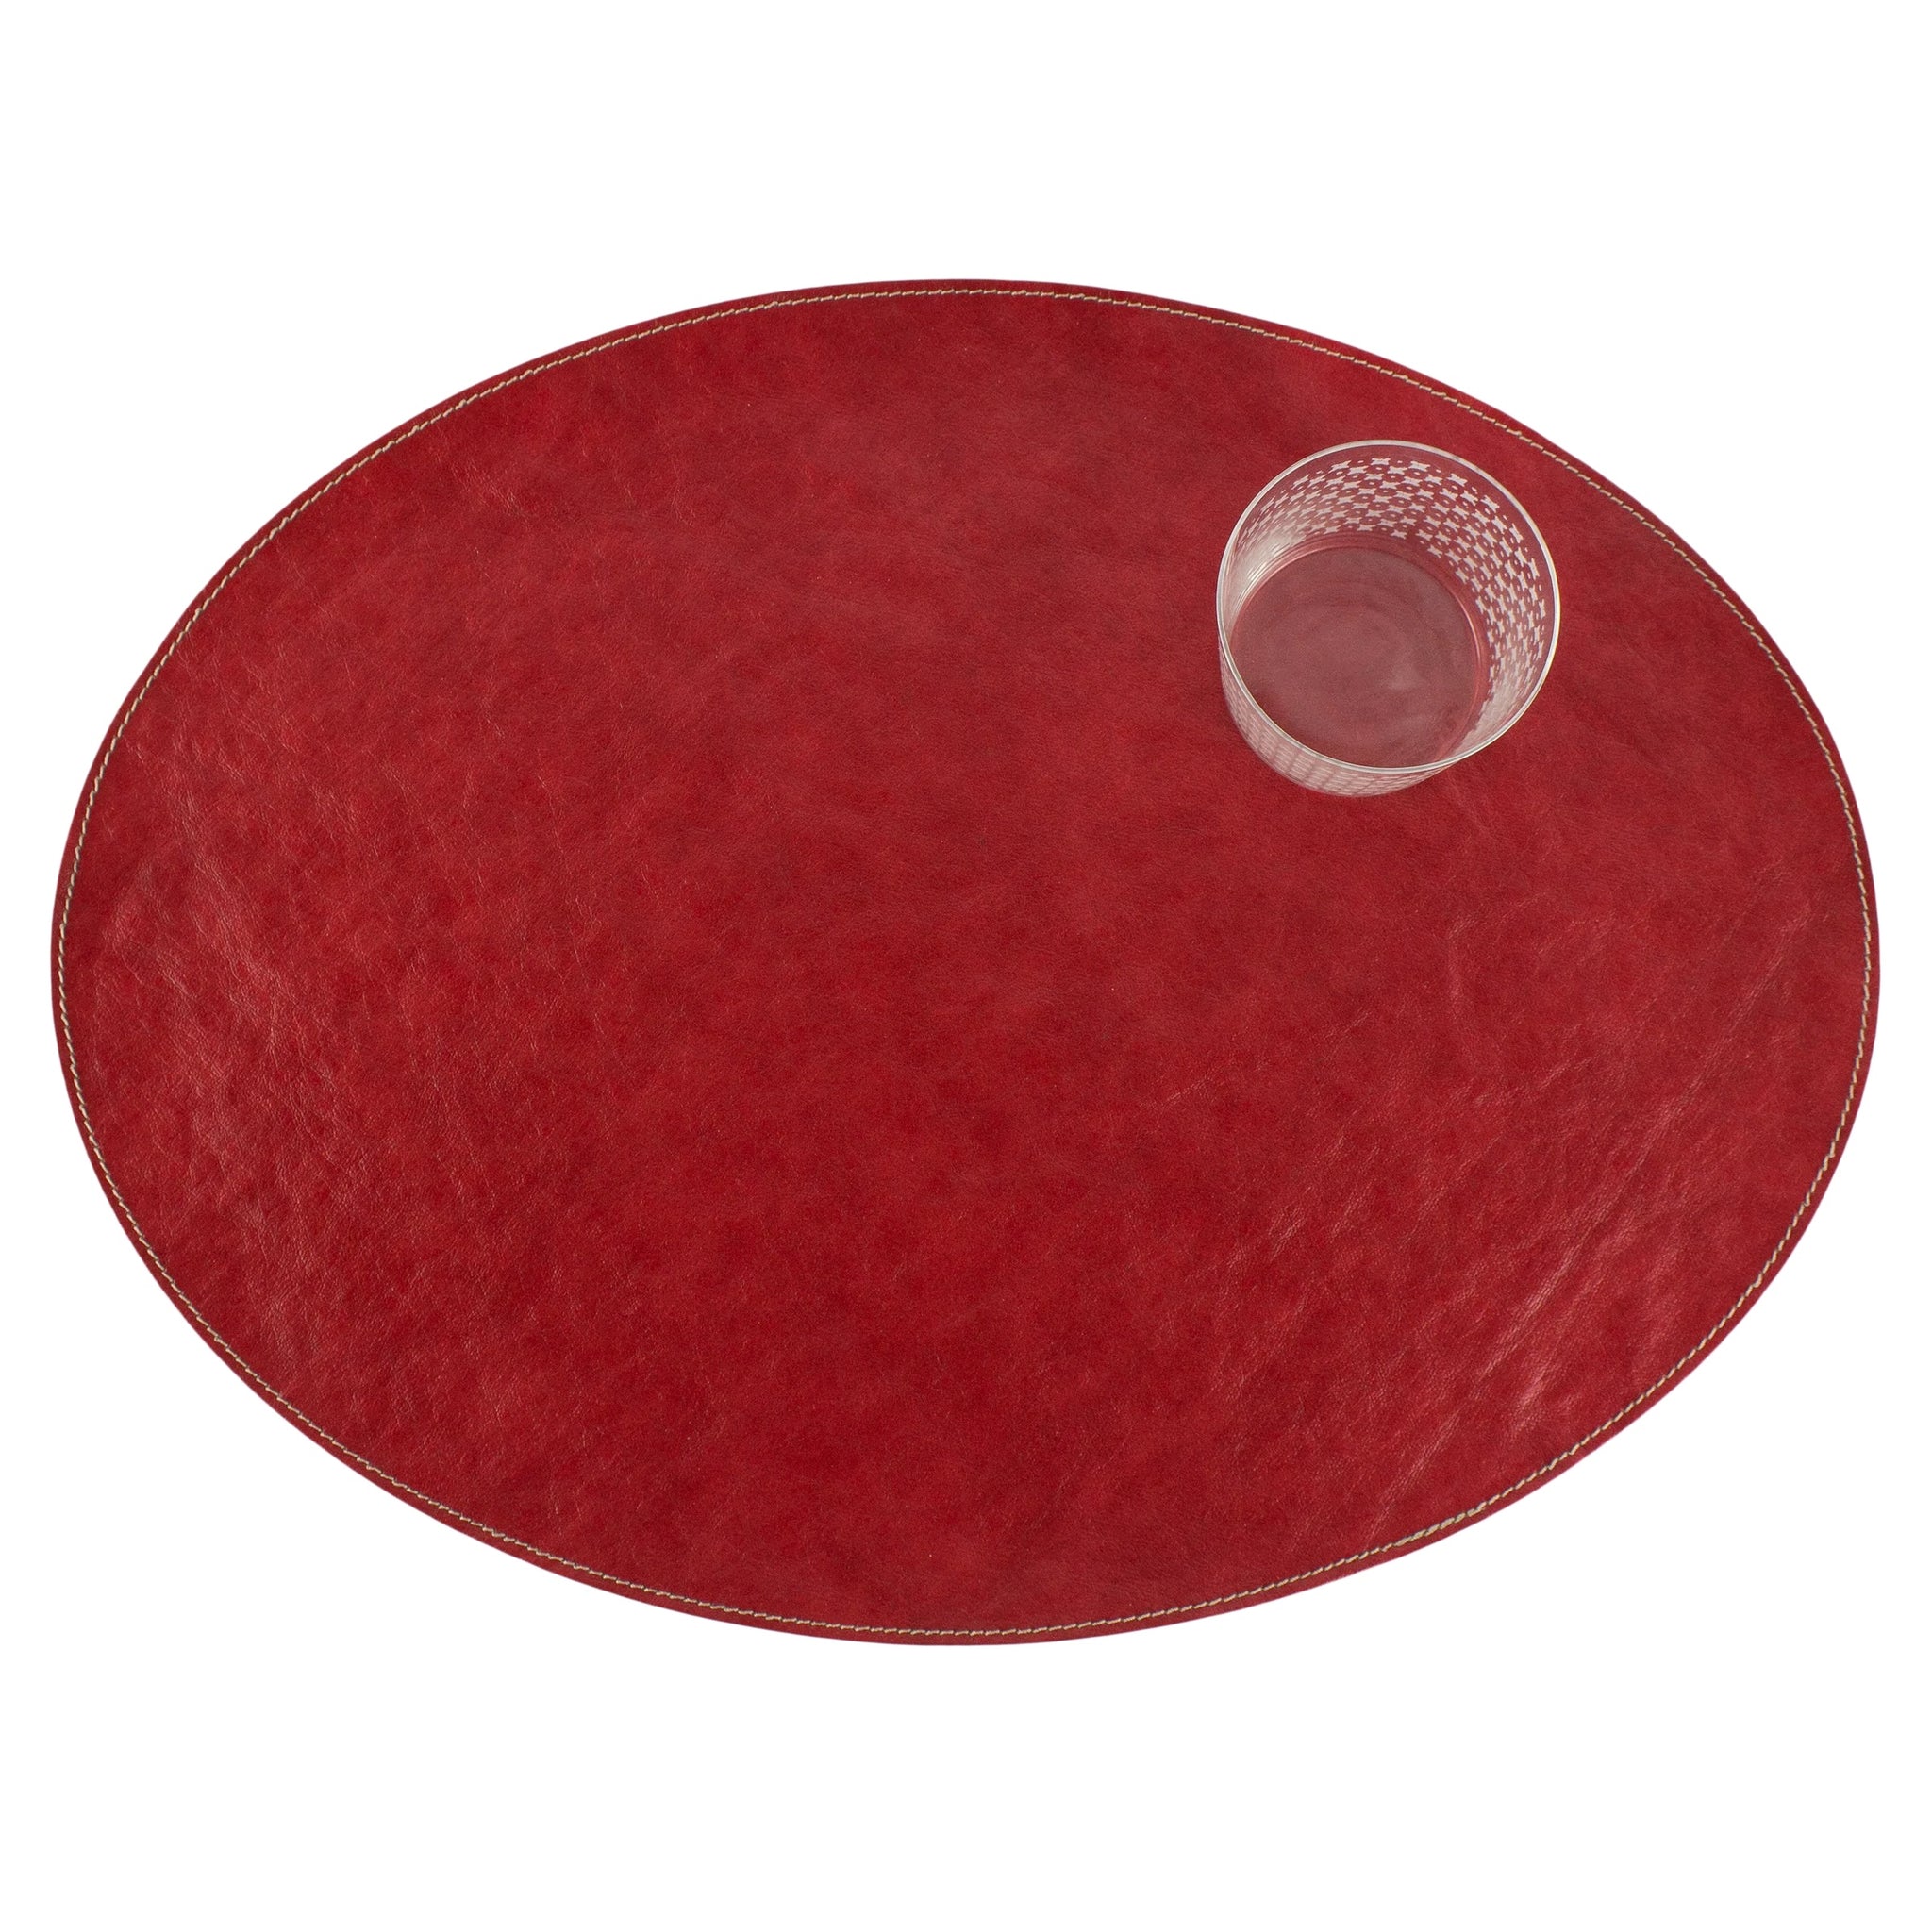 COATED PAPER OVAL PLACEMAT IN RED